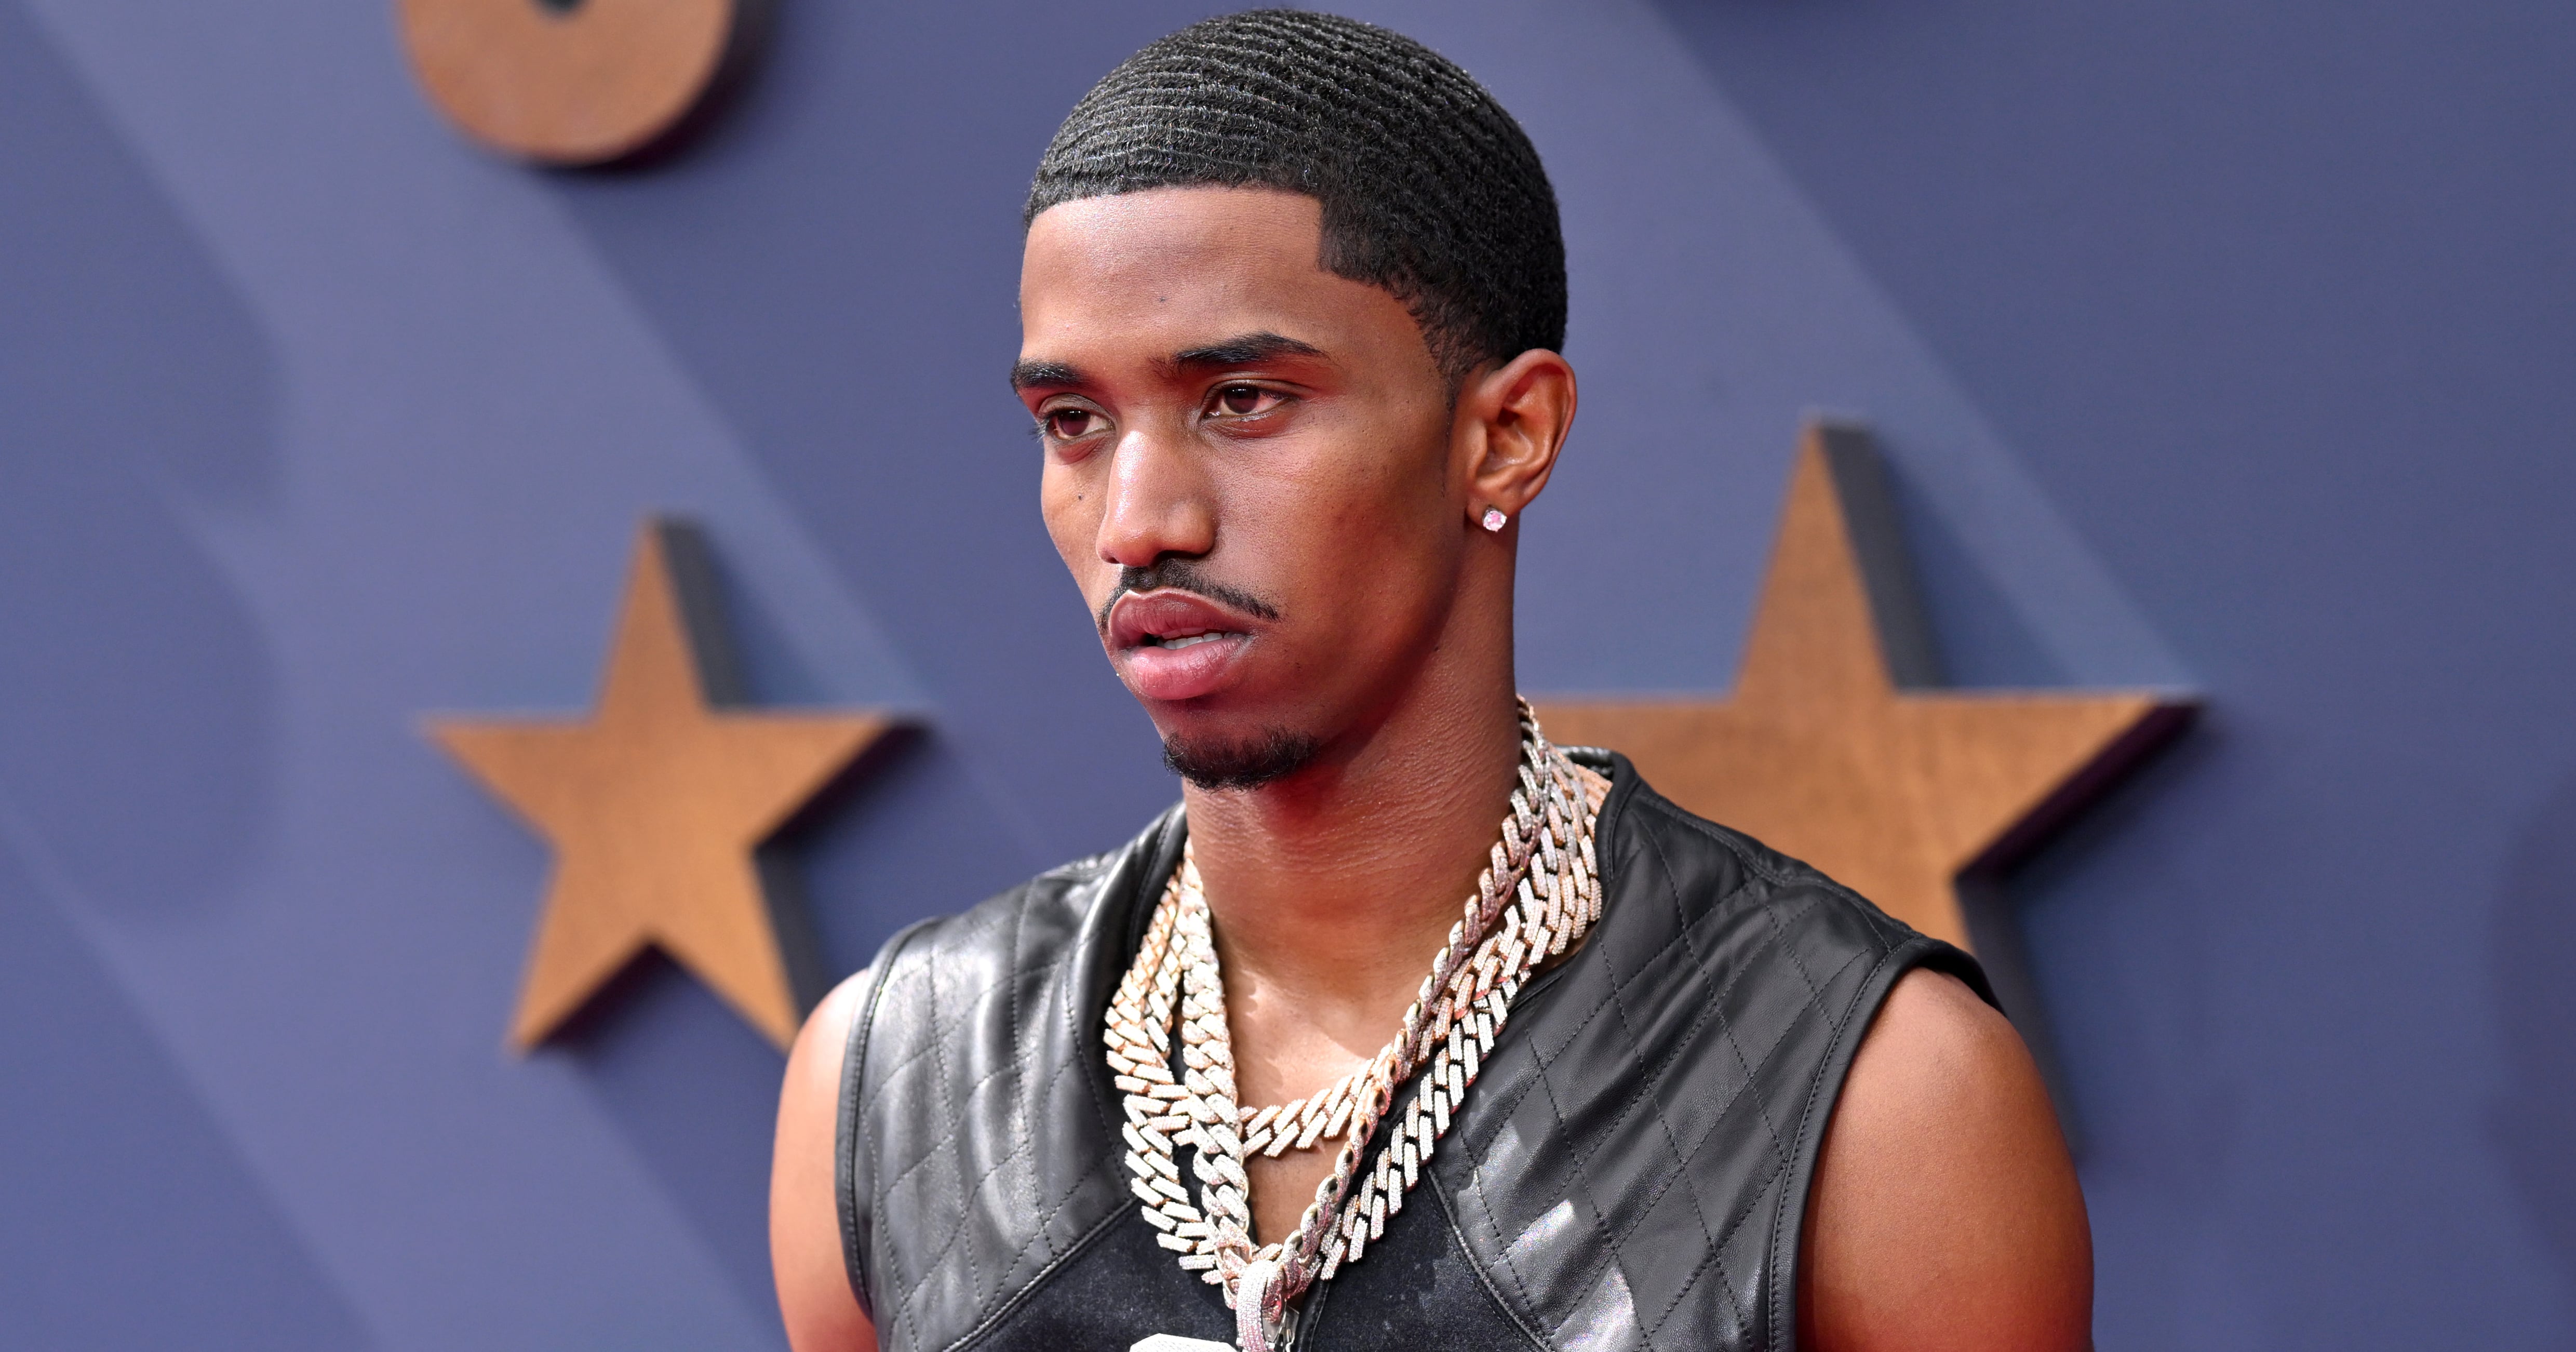 King Combs Speaks On His Debut Album: 'It's Going To Be A Movie